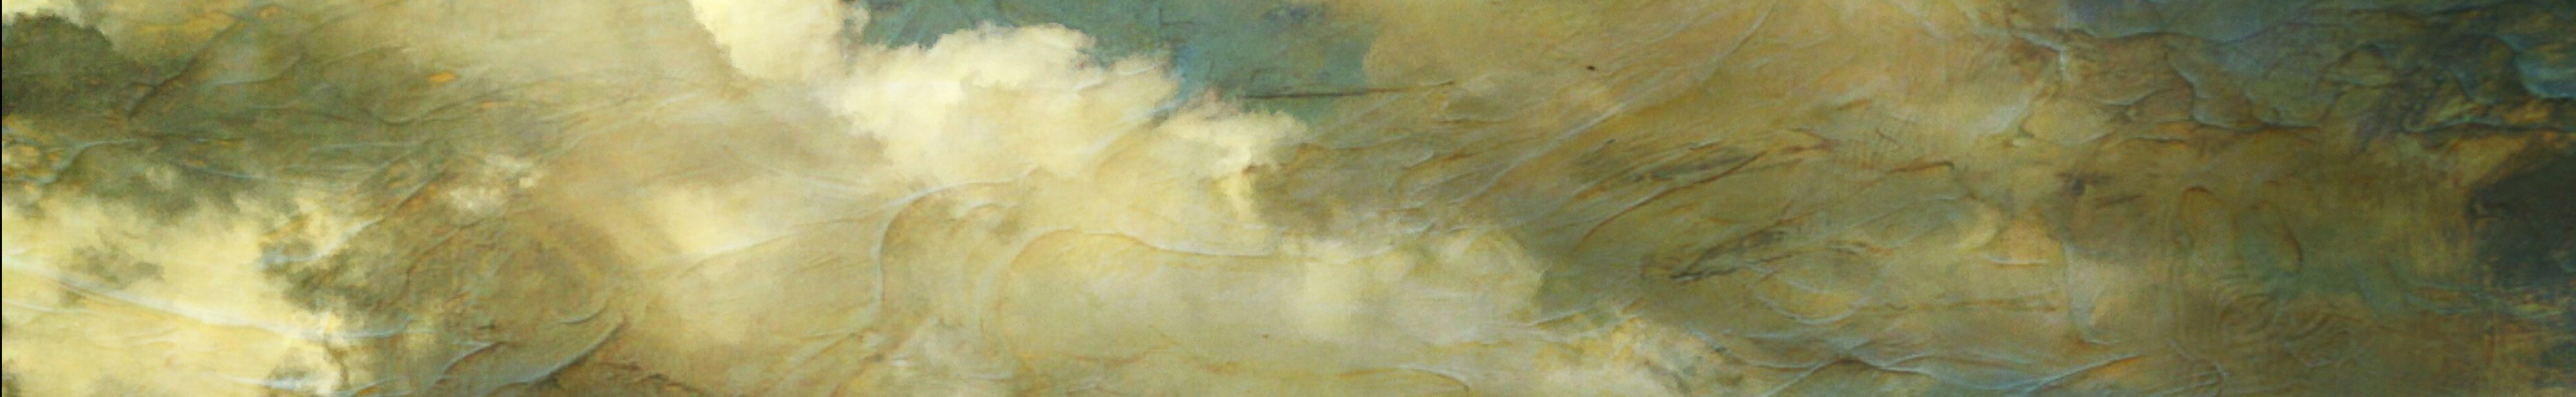 Mary Hollis's profile banner